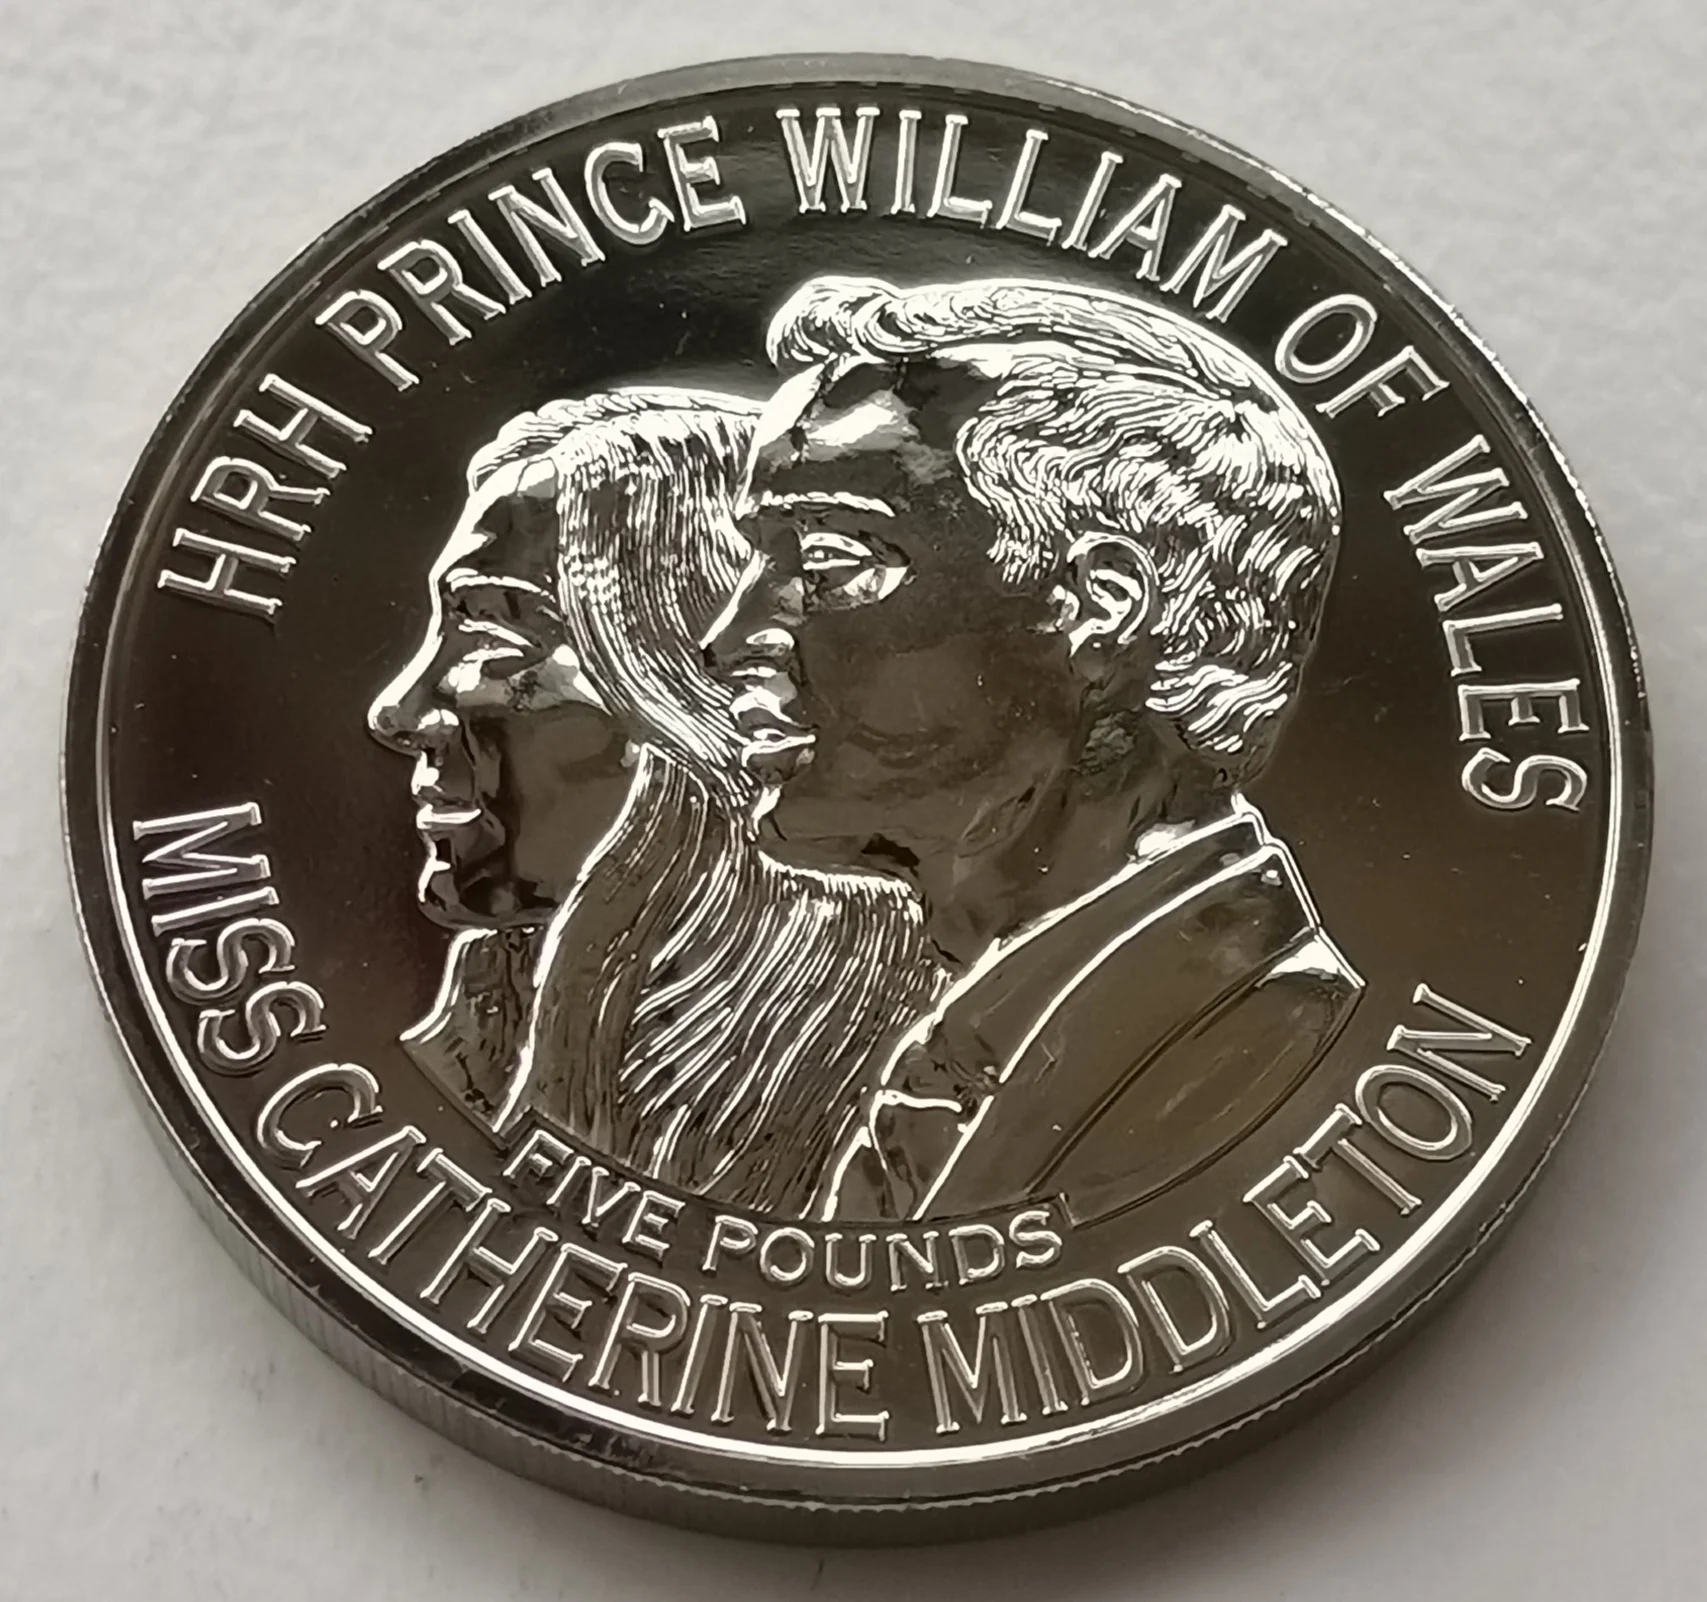 

38mm Prince William and Kate Middleton Genxi 2011 5 Pounds Commemorative Coin Queen's Head Crown Coin